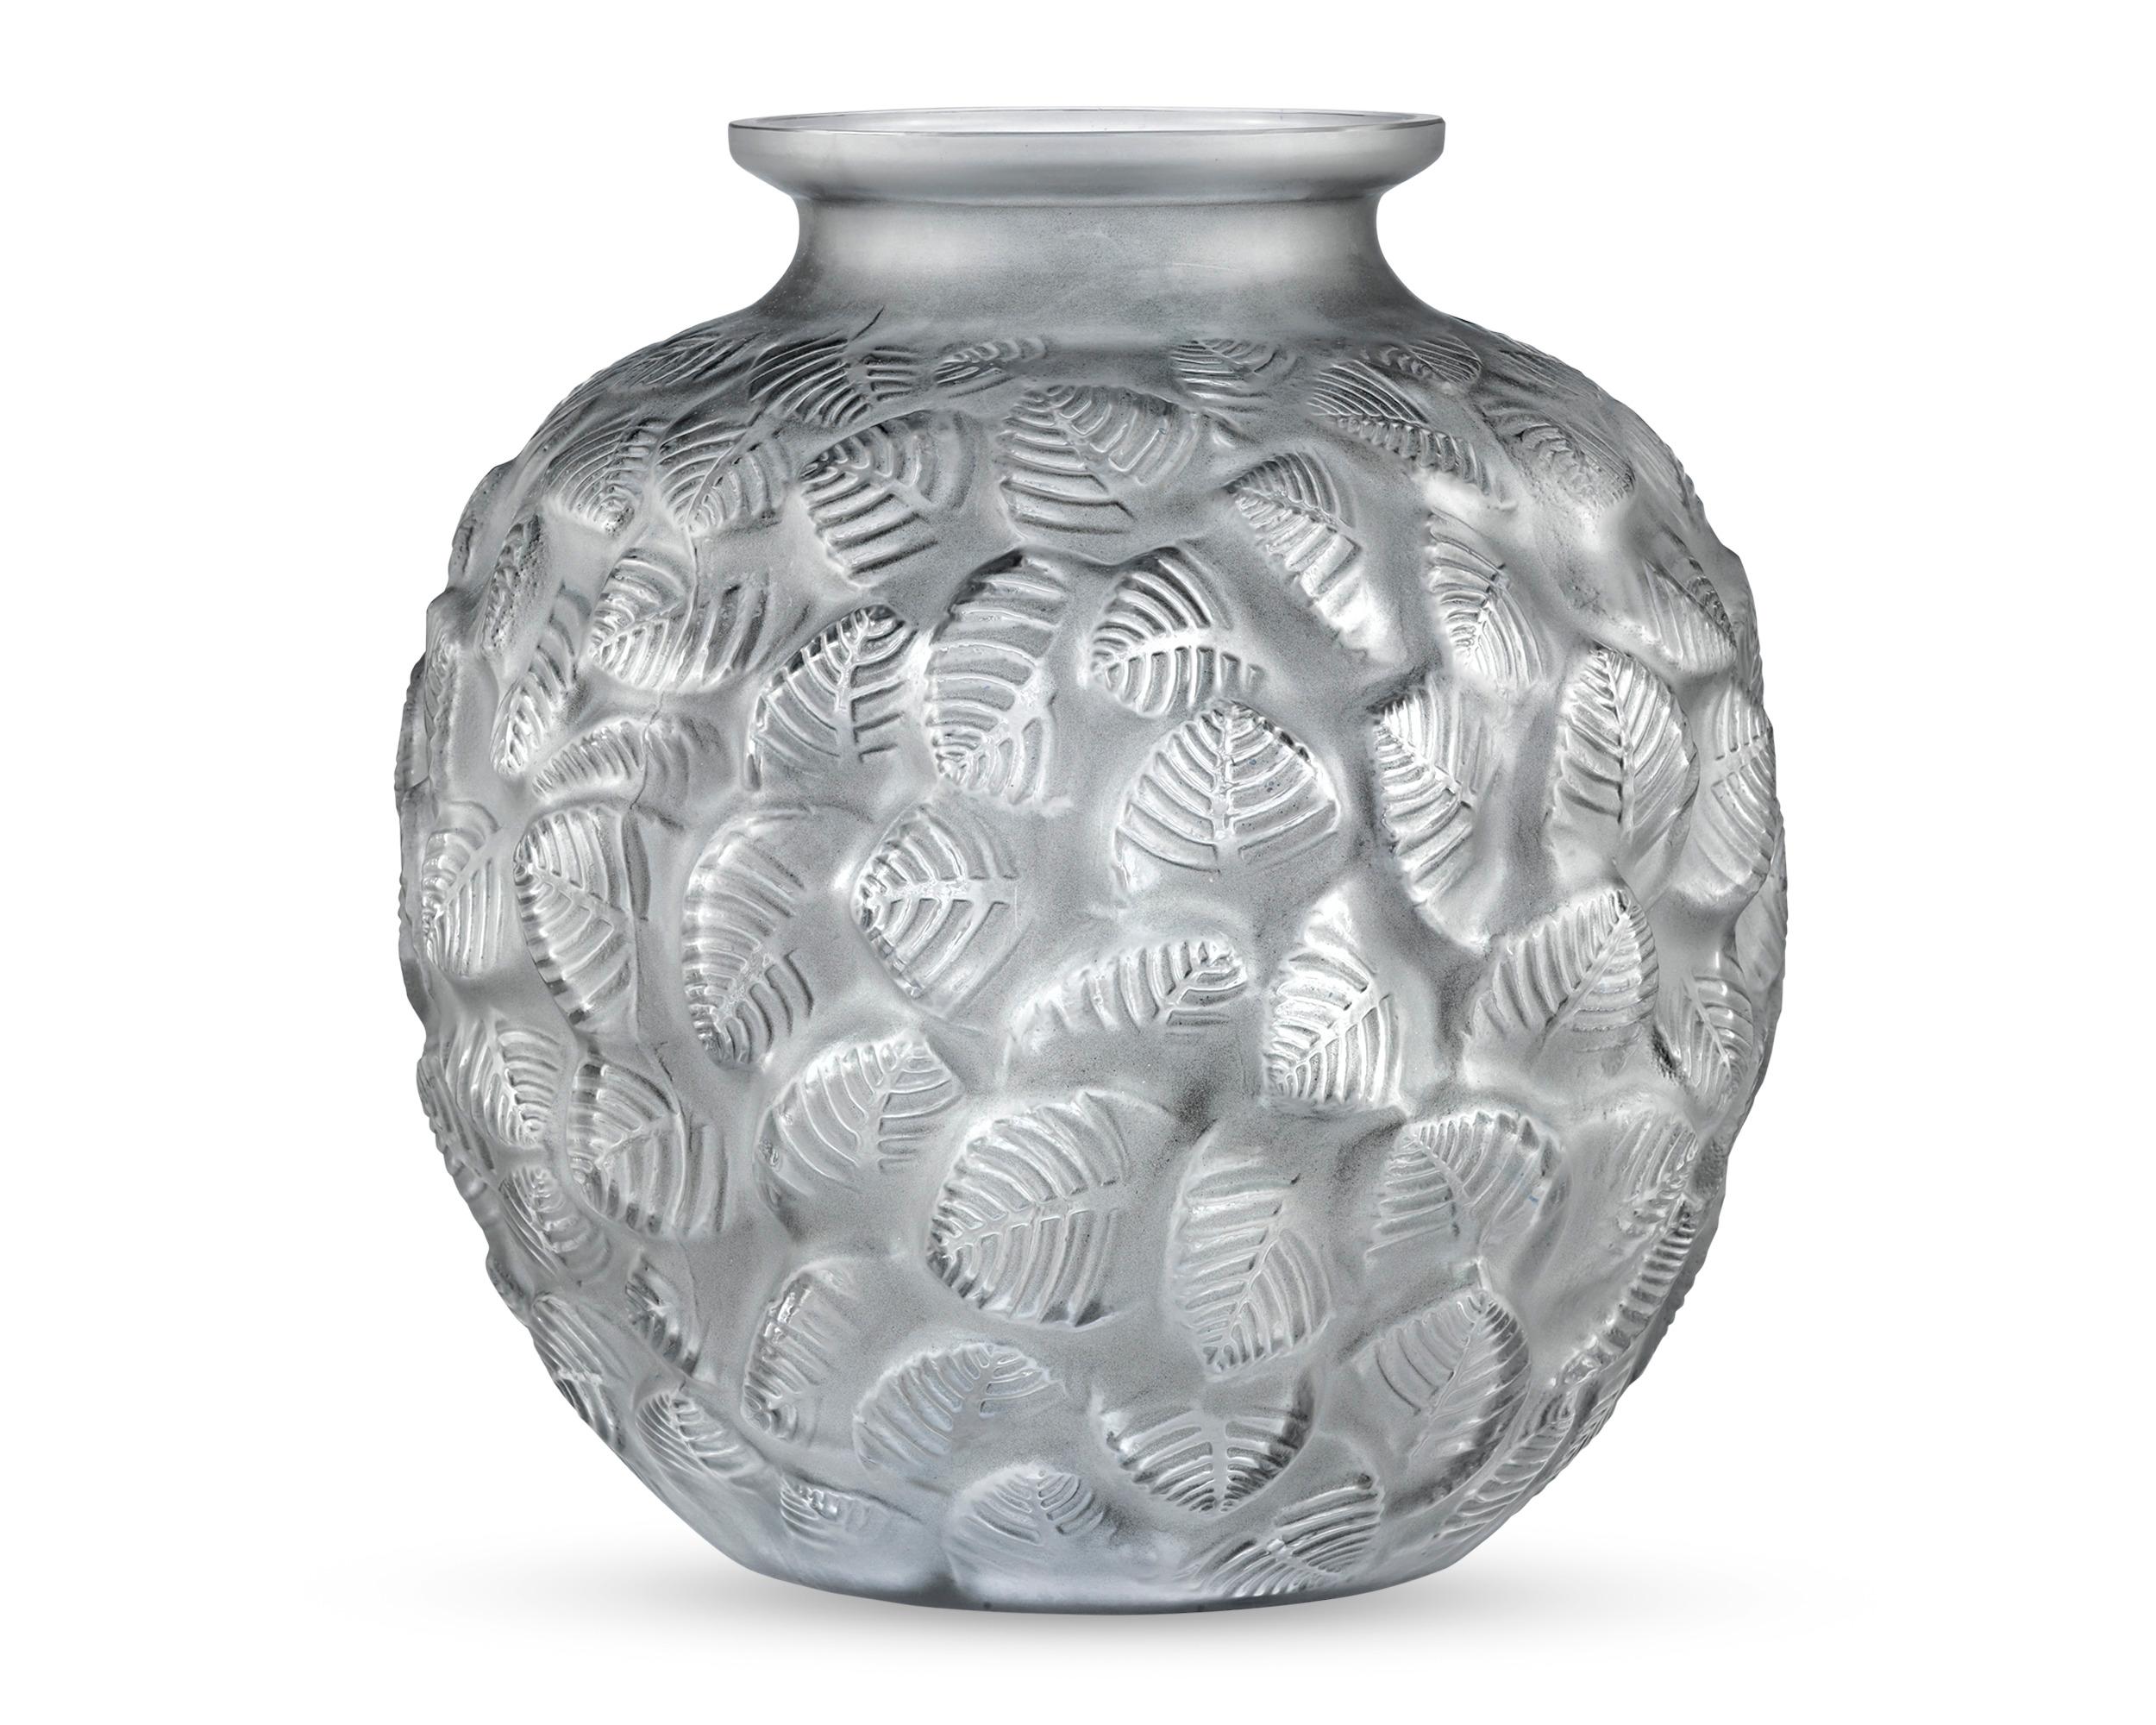 Abstracted foliate motifs swirl atop each other to form this Lalique vase in the Charmilles motif, first designed by René Lalique on October 8, 1926. Inspired by bowers under greenery and composed of elegant frosted glass, this vase embodies the